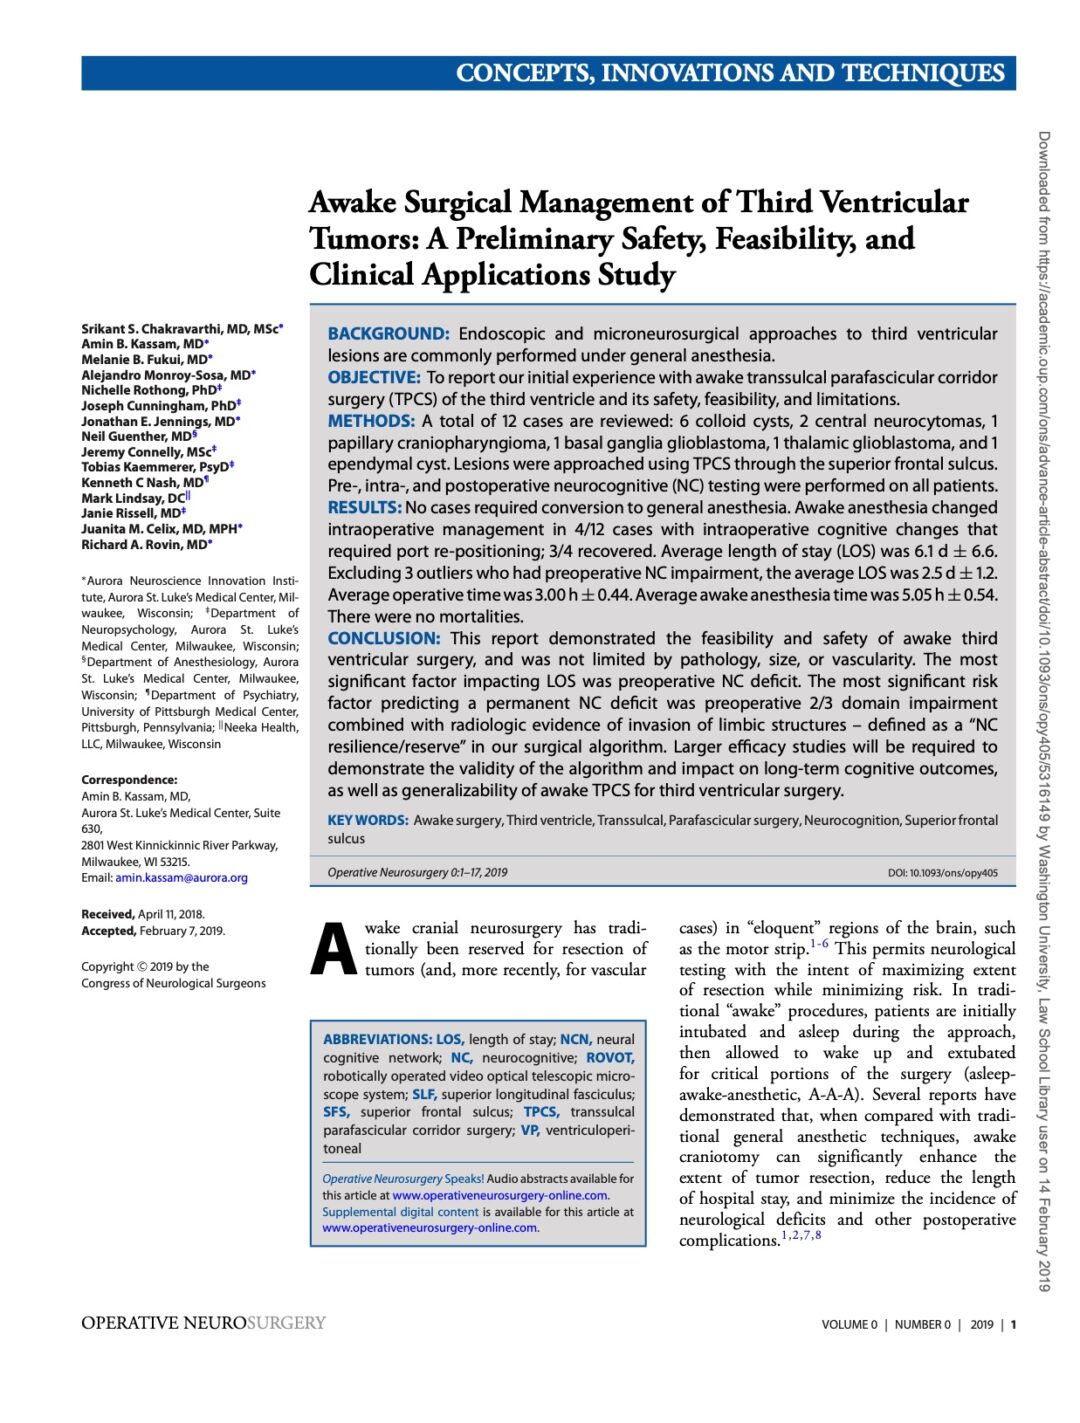 Awake Surgical Management of Third Ventricular Tumors: A Preliminary Safety, Feasibility, and Clinical Applications Study